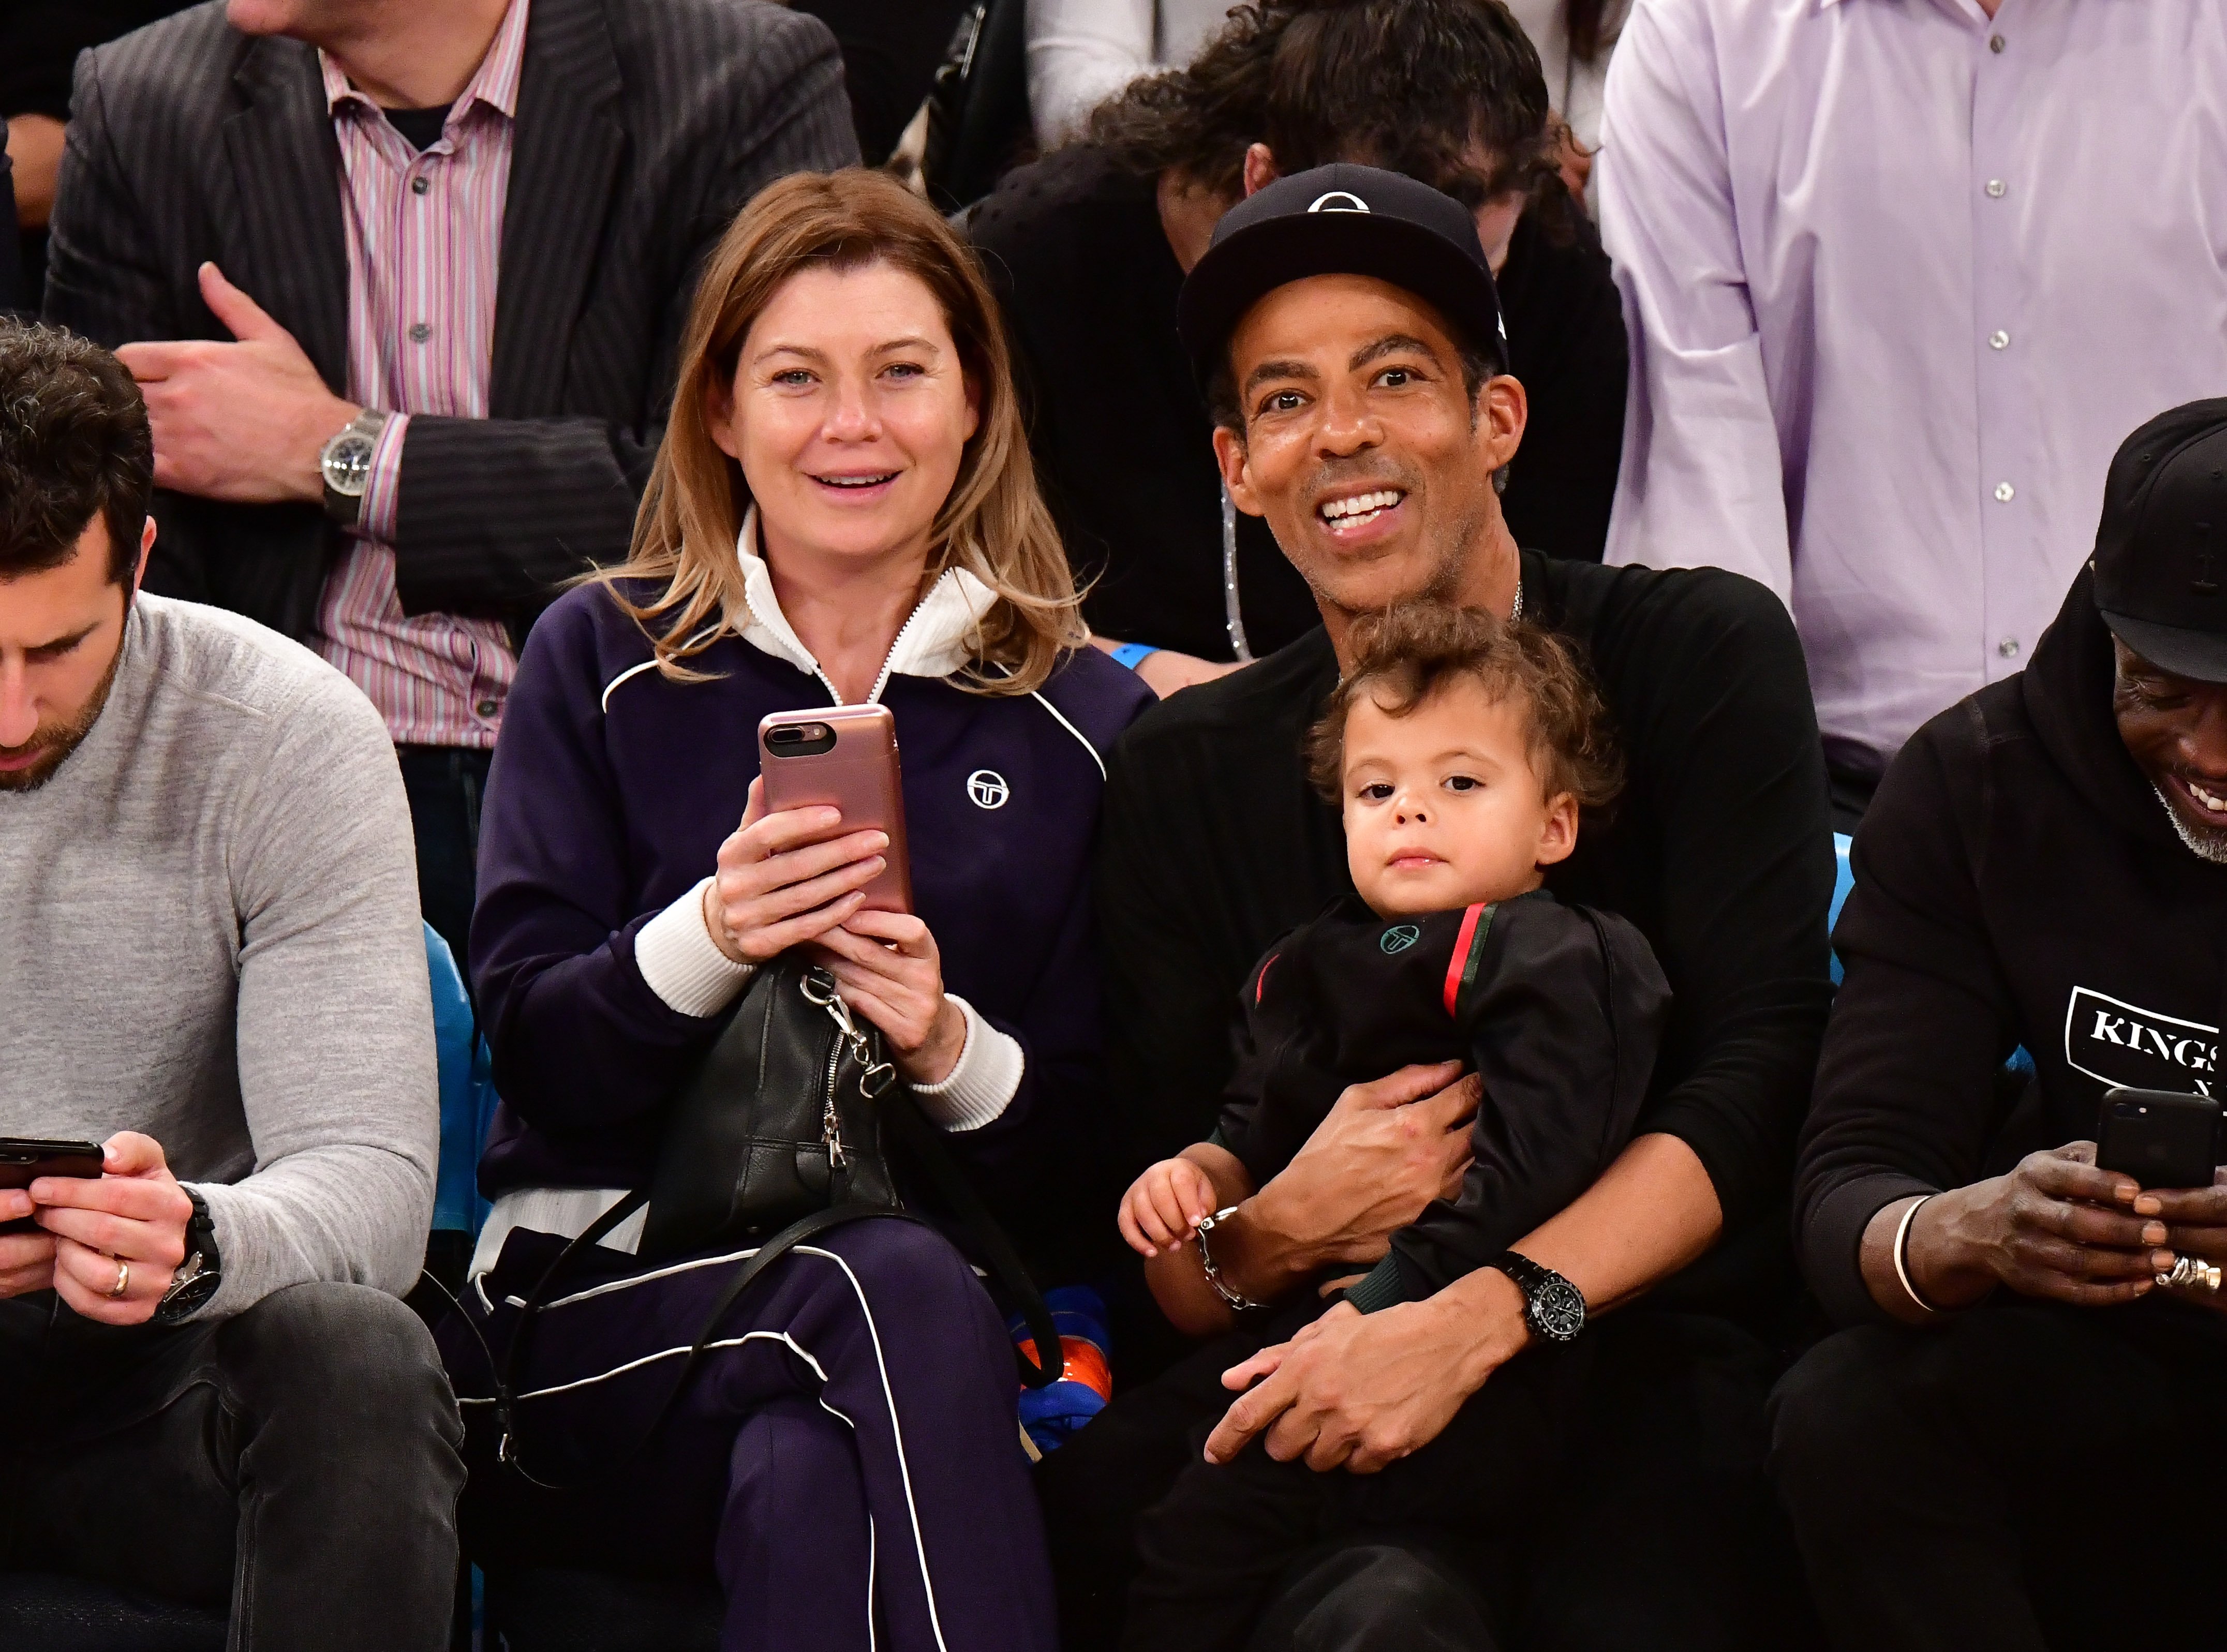 Ellen Pompeo, Eli Ivery, and Chris Ivery attend the Portland Trail Blazers vs New York Knicks game on November 20, 2018 in New York City. 